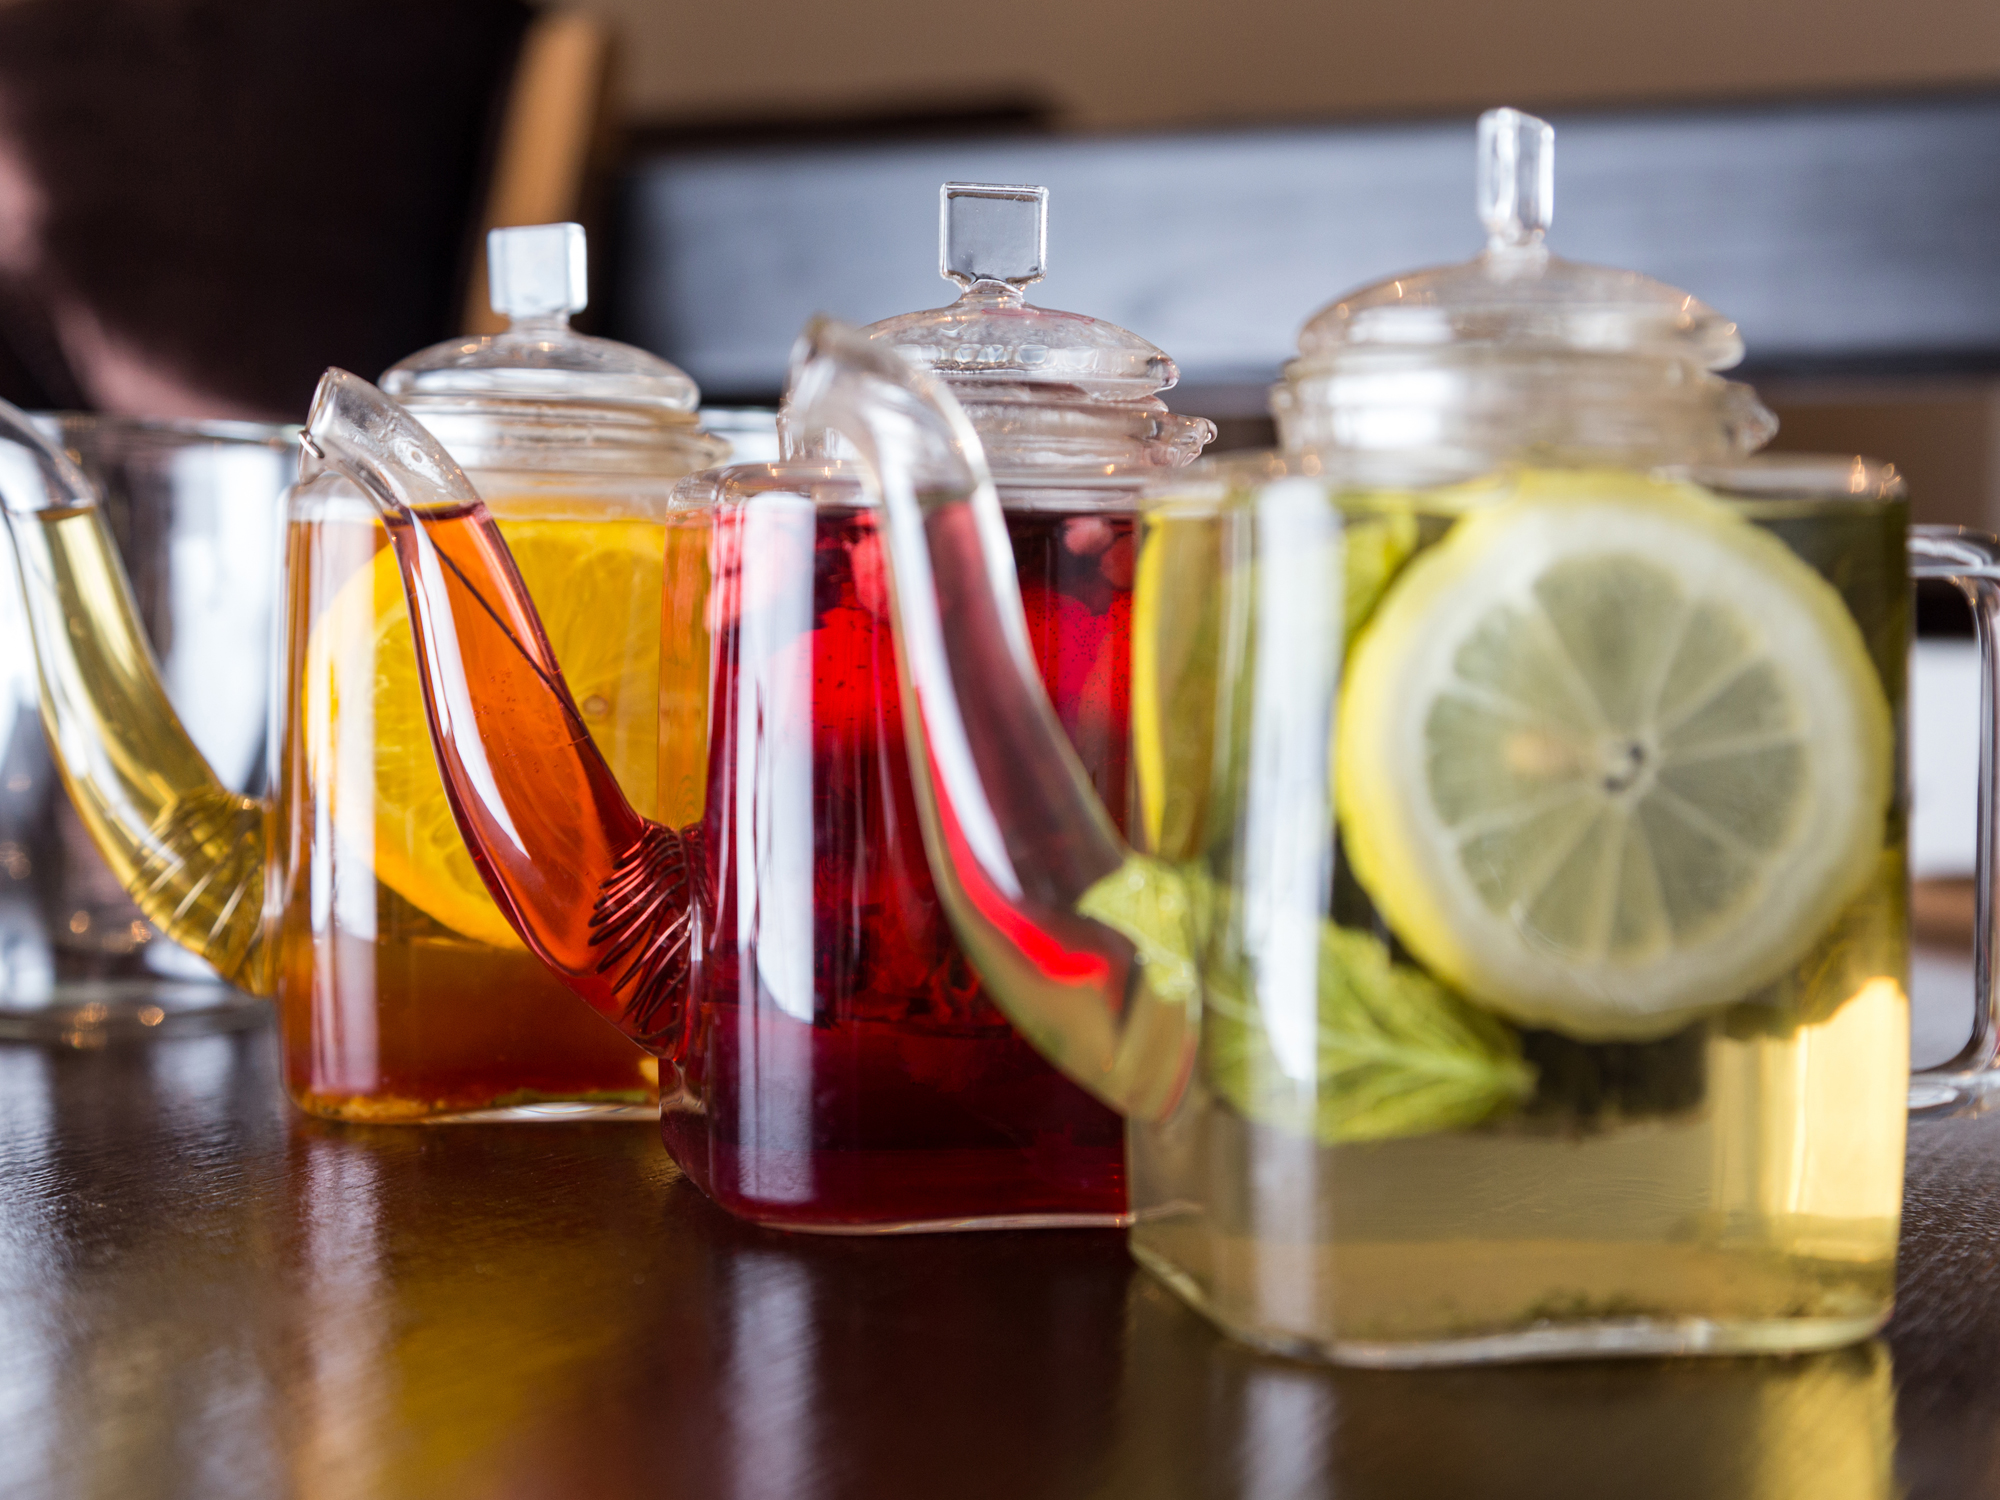 Sip on these 3 cancer-fighting teas